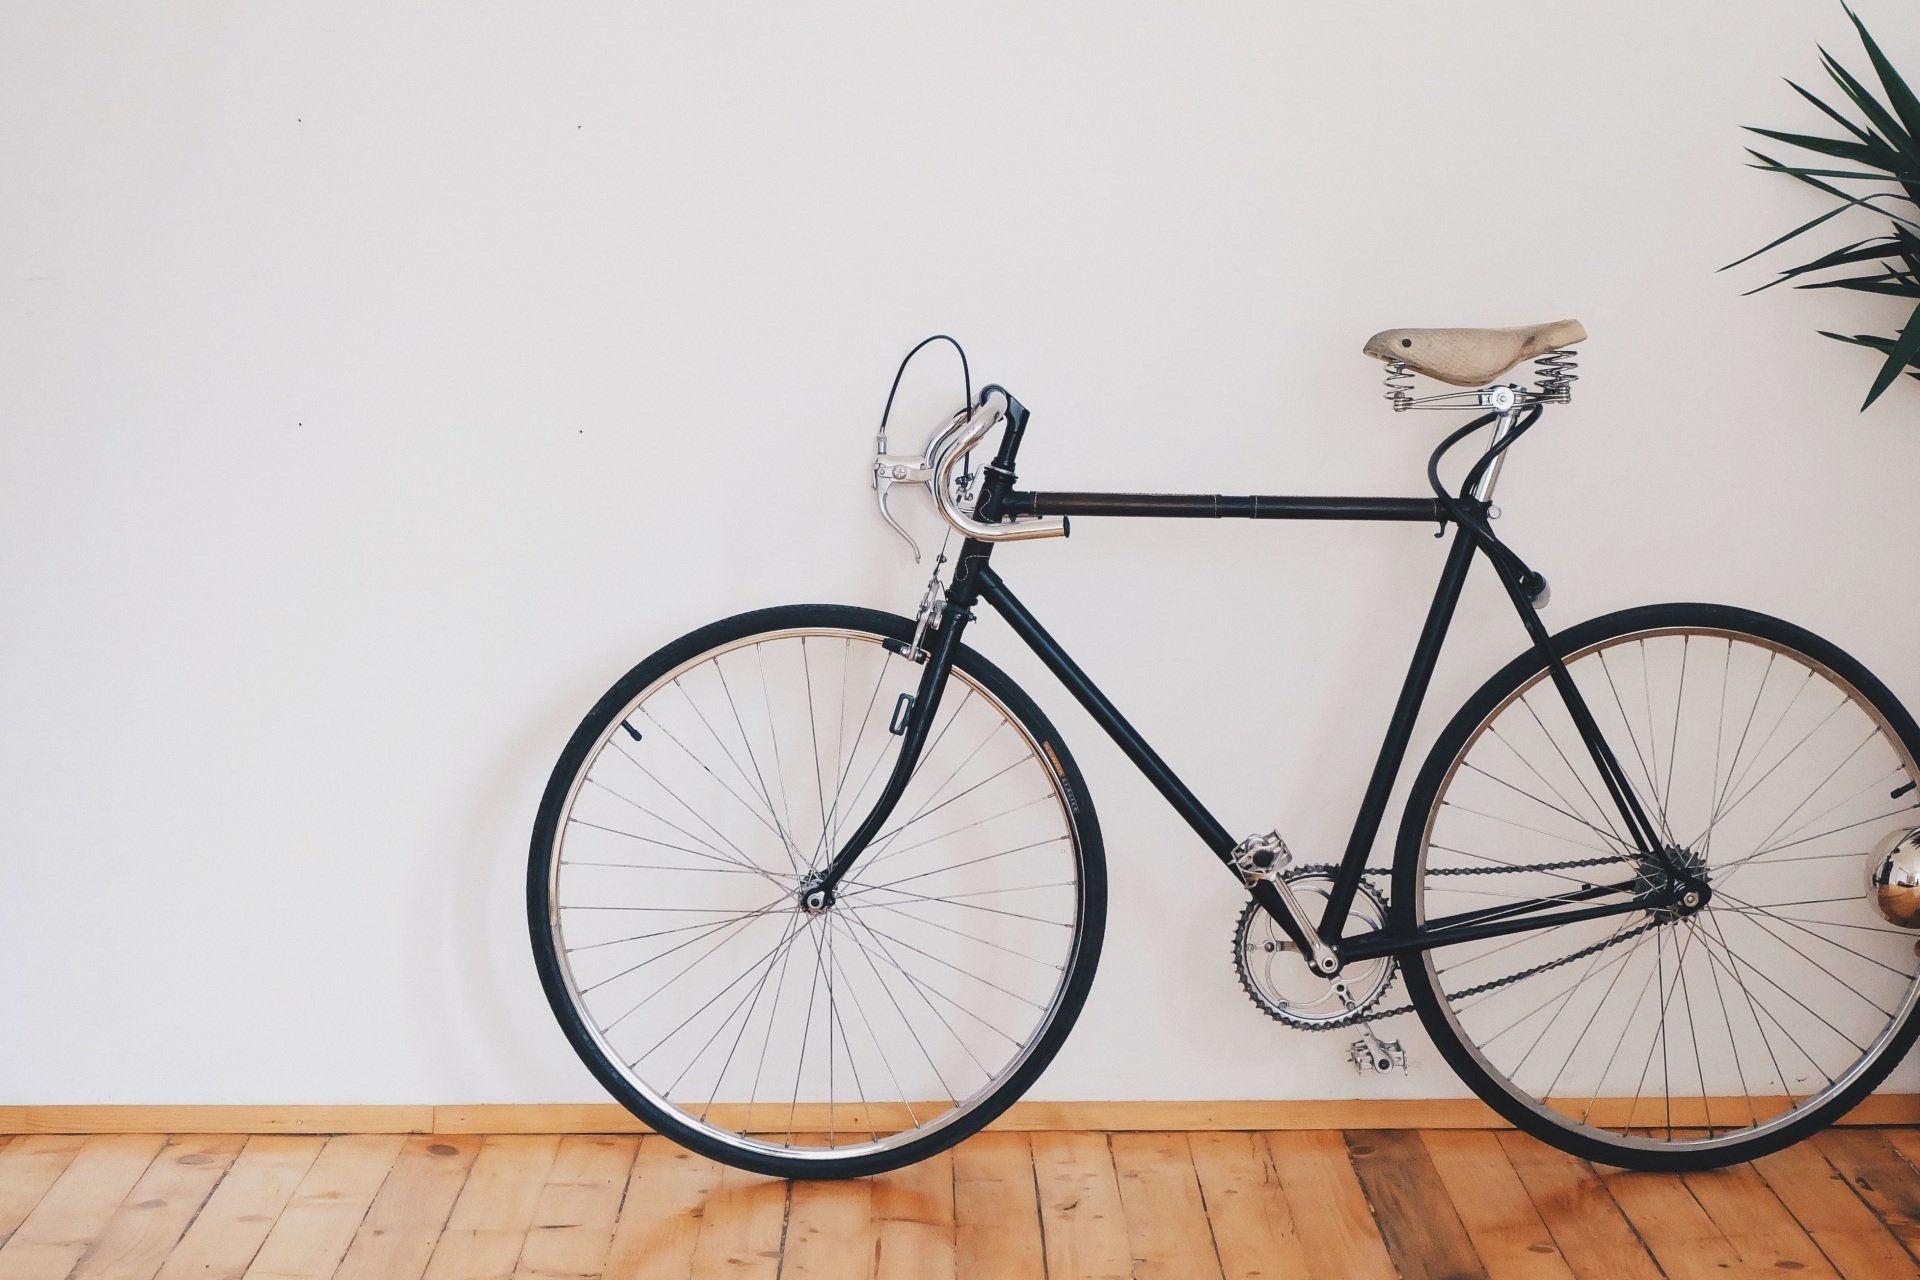 A black bicycle is leaning against a white wall